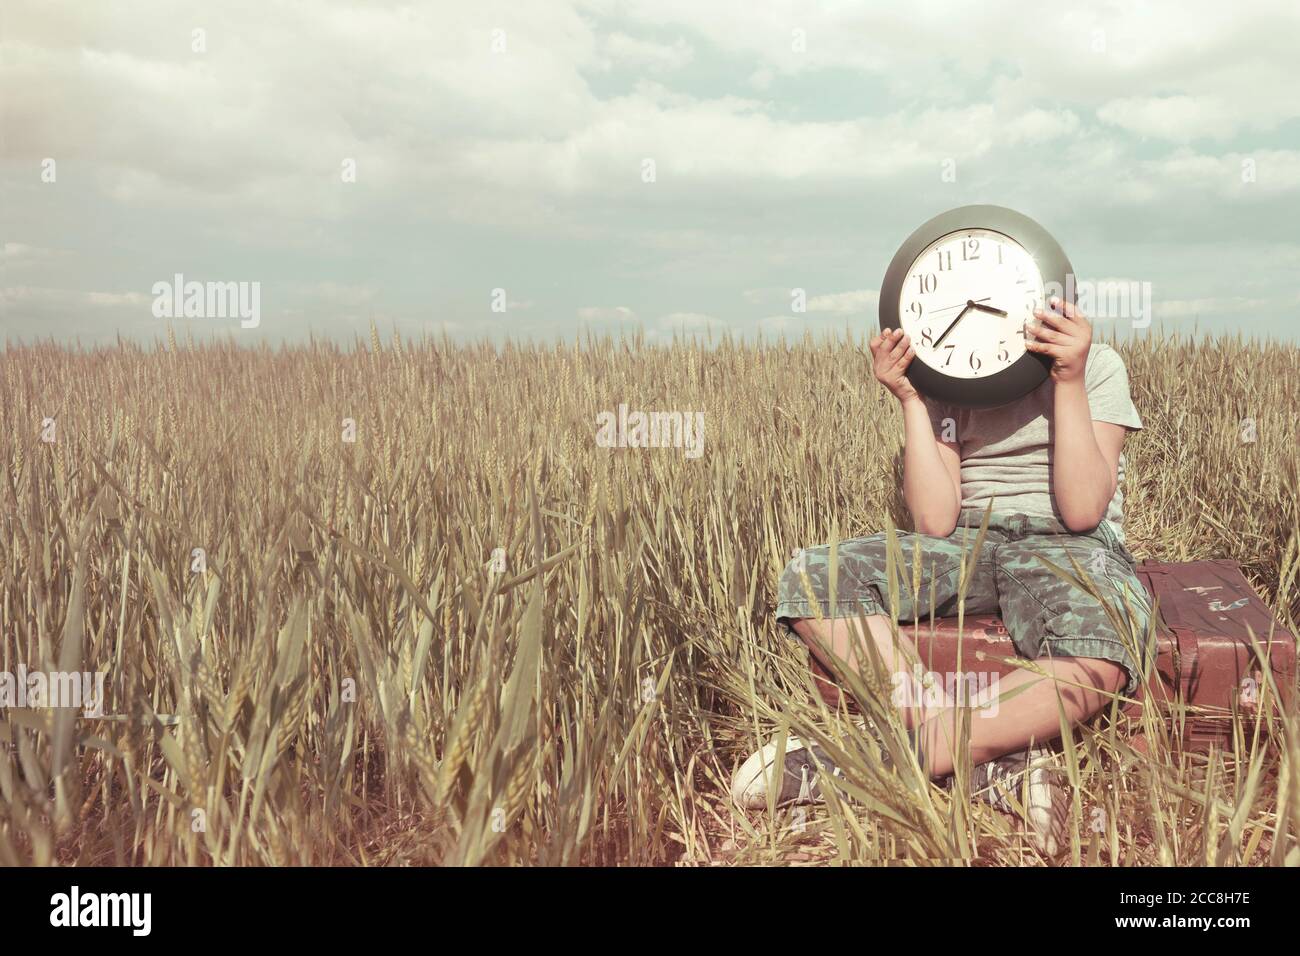 Boy on a trip hides his face with a clock in a desert landscape Stock Photo